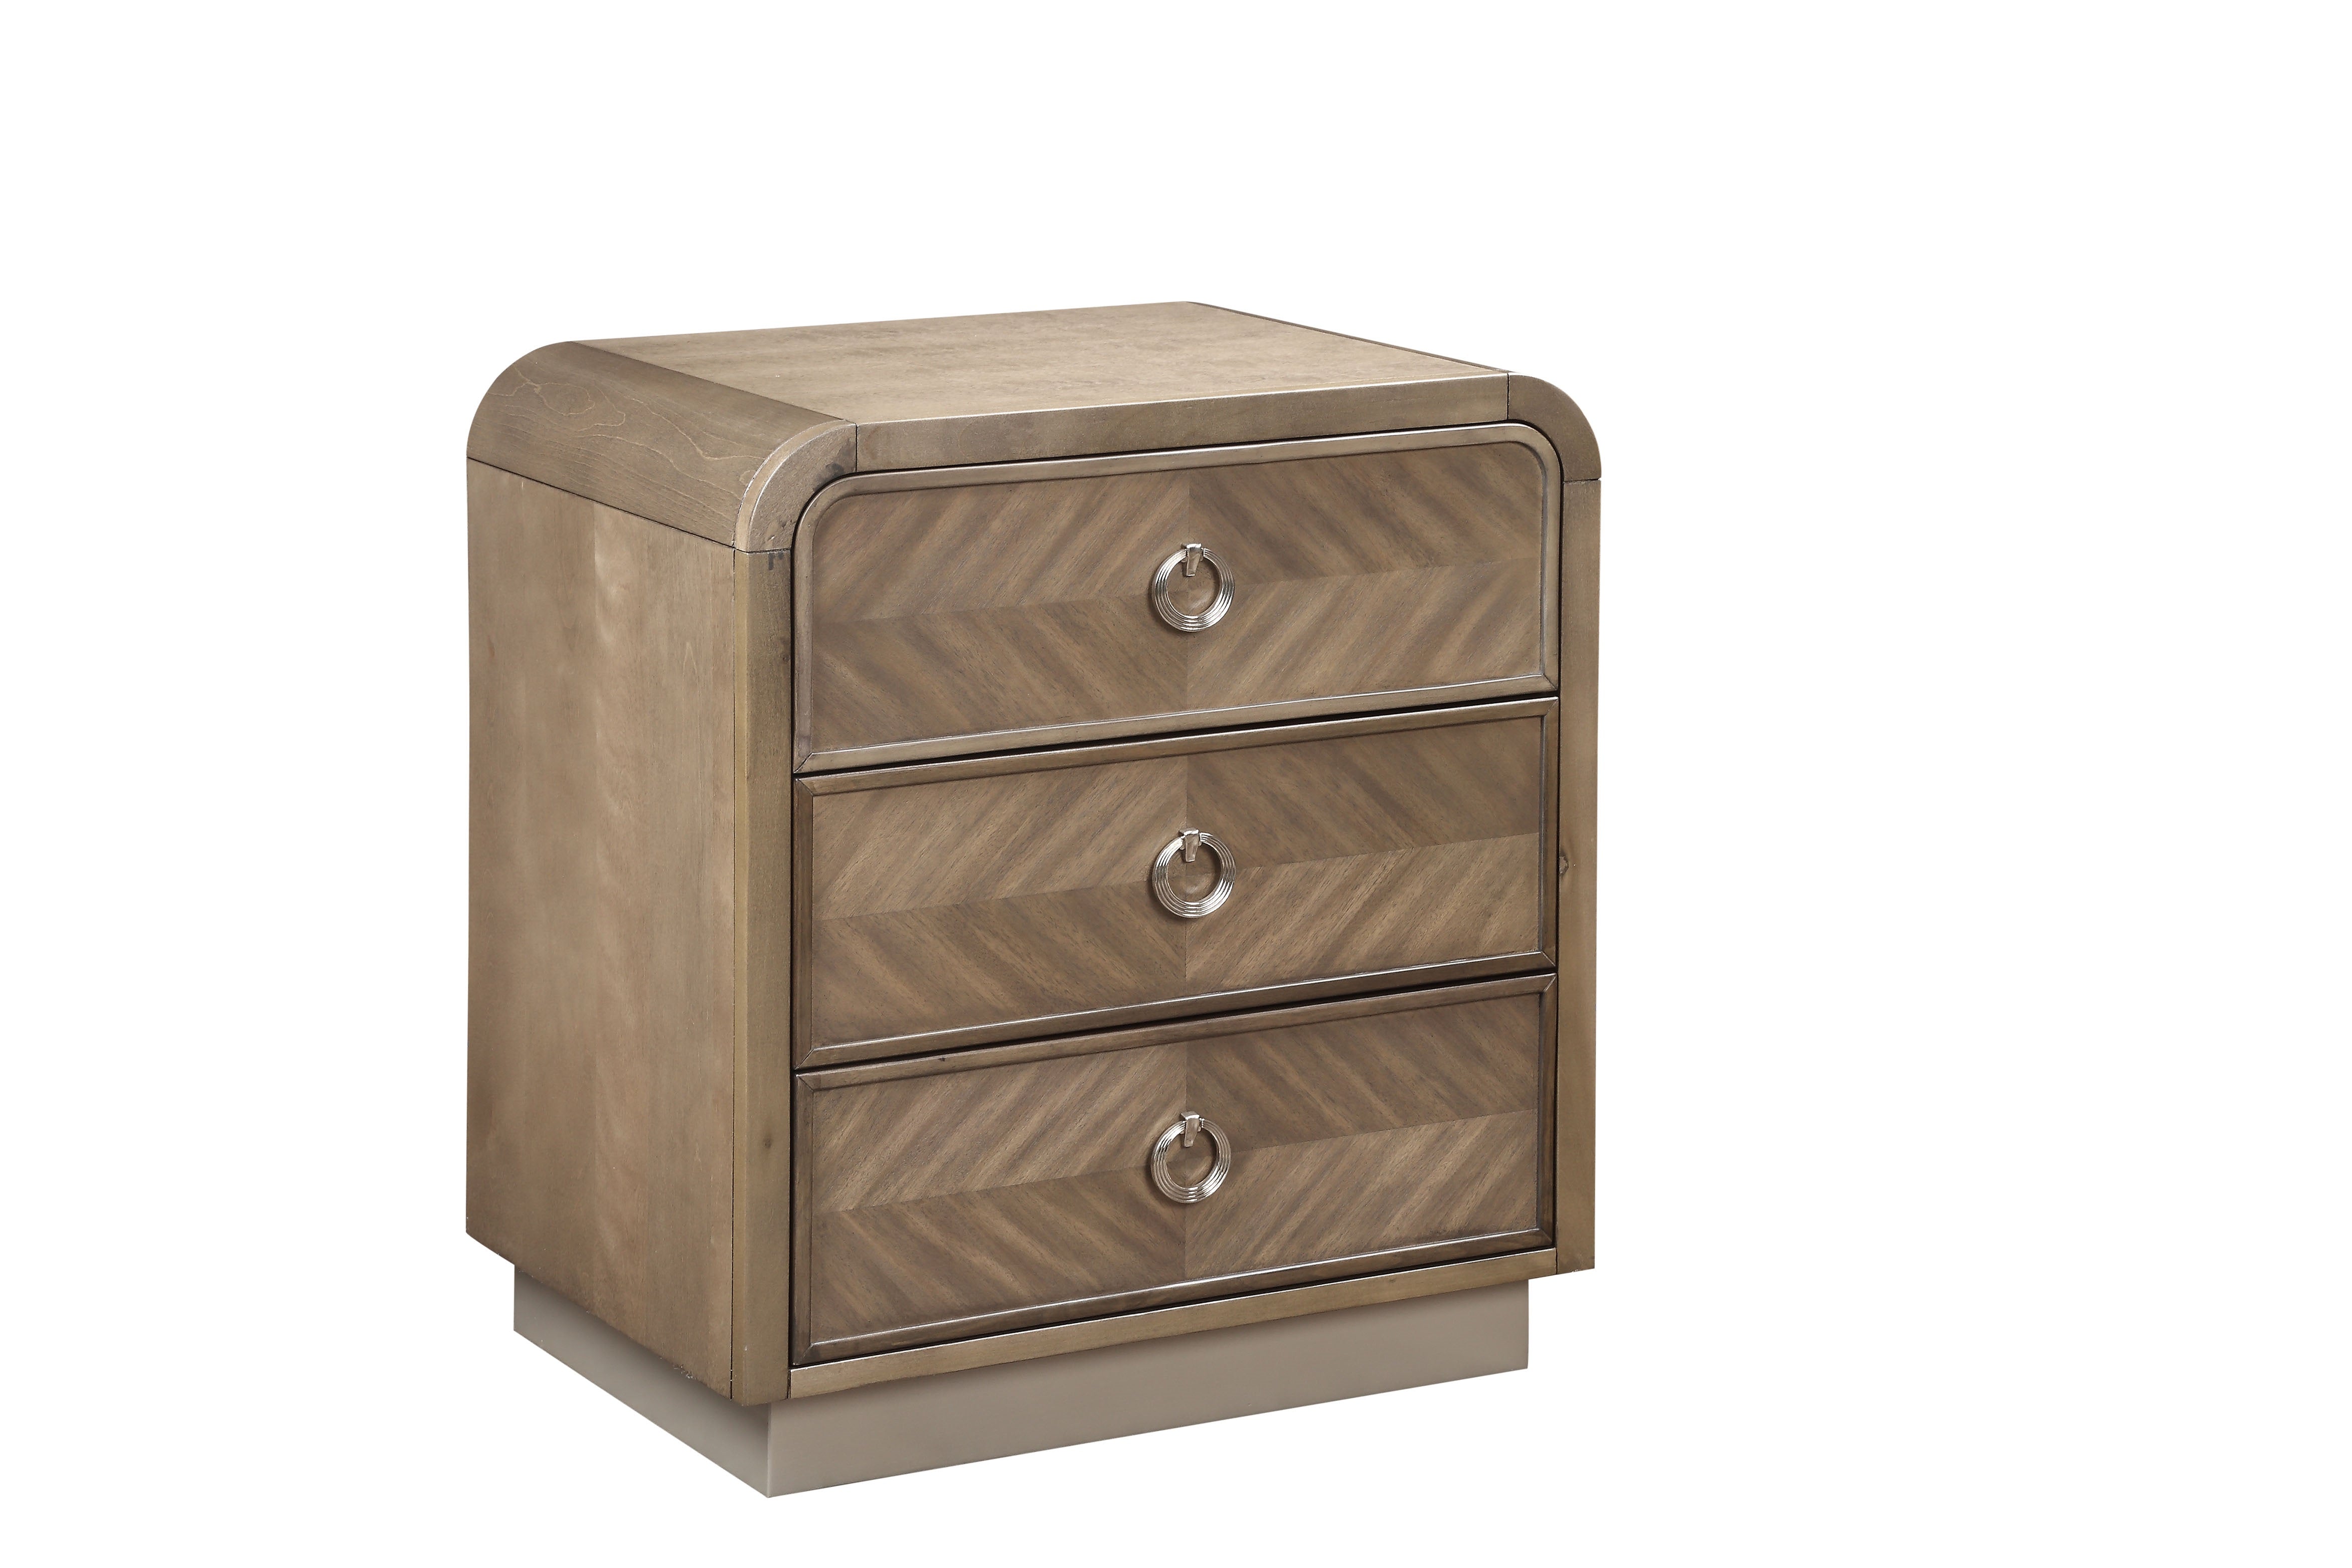 Oasis Home Cascade 3 Drawer Nightstand